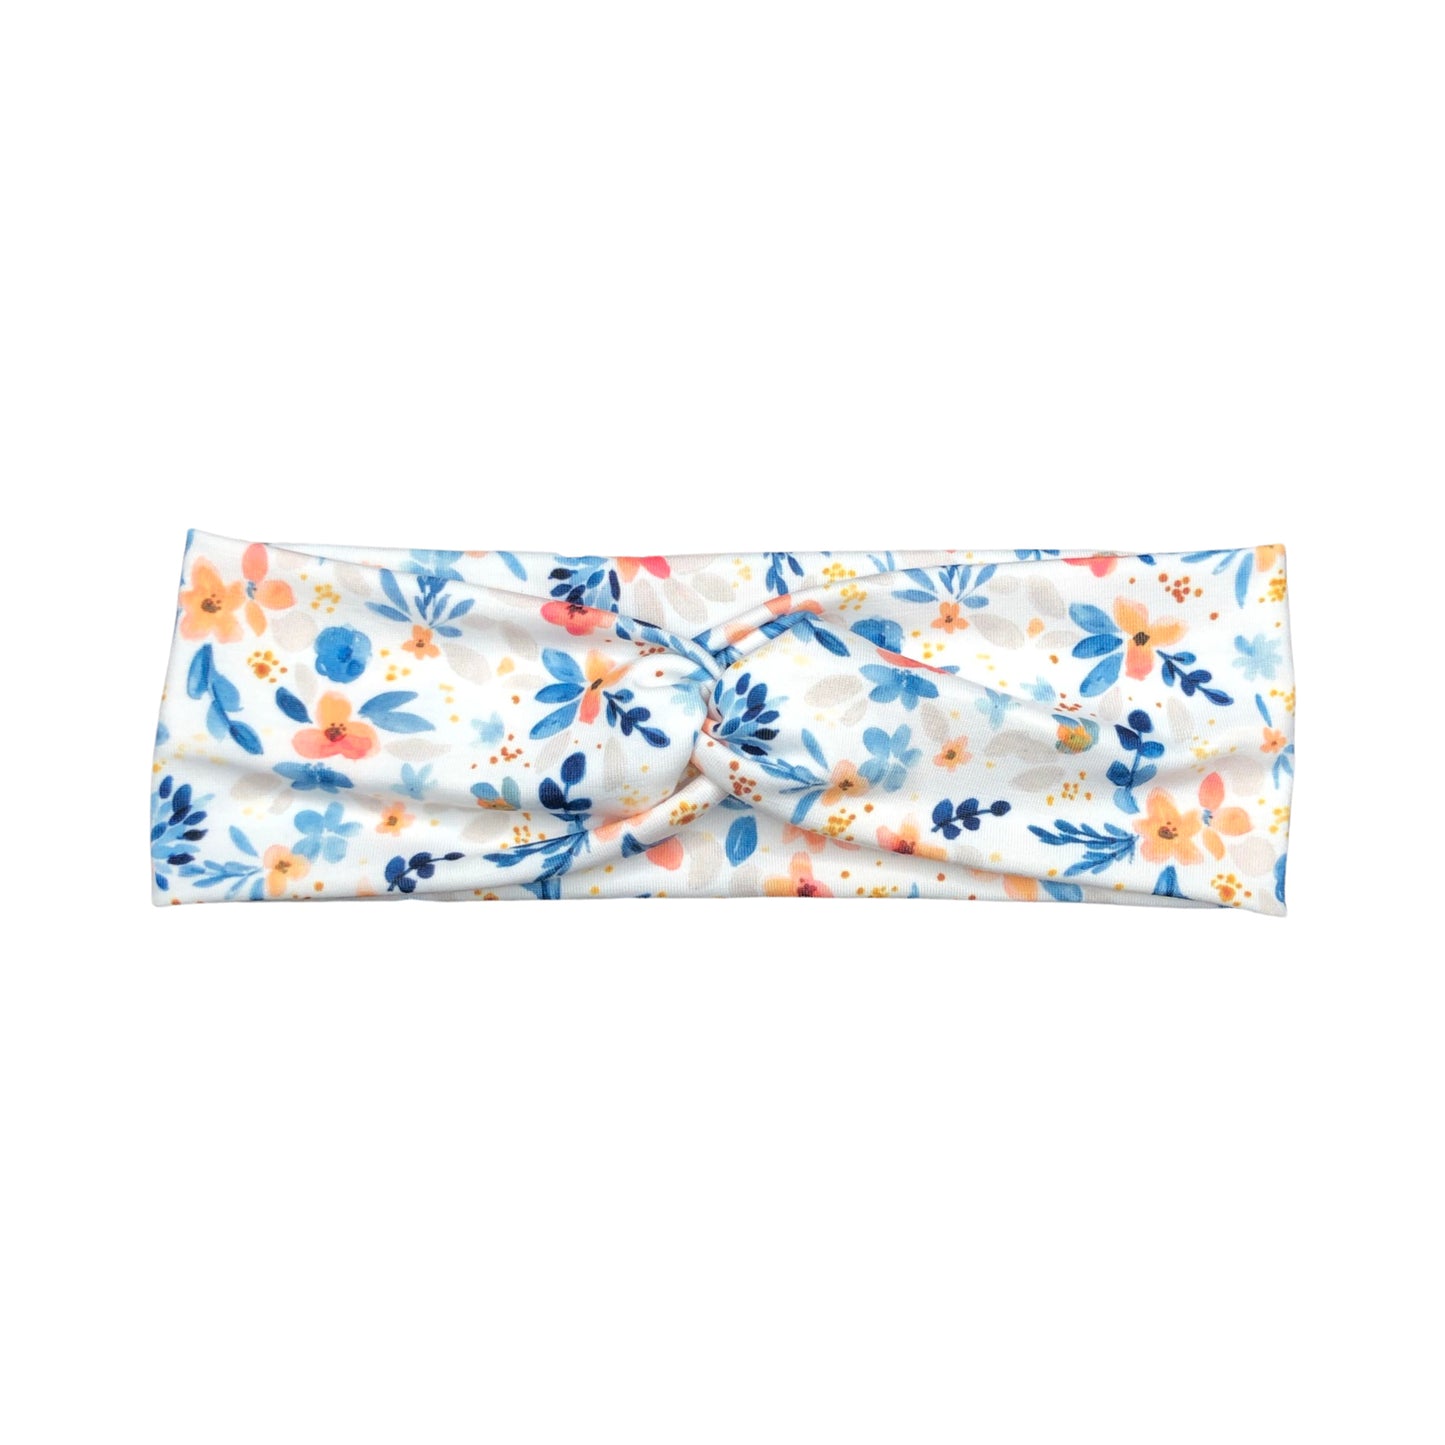 Blue and Peach Floral Headband for Women